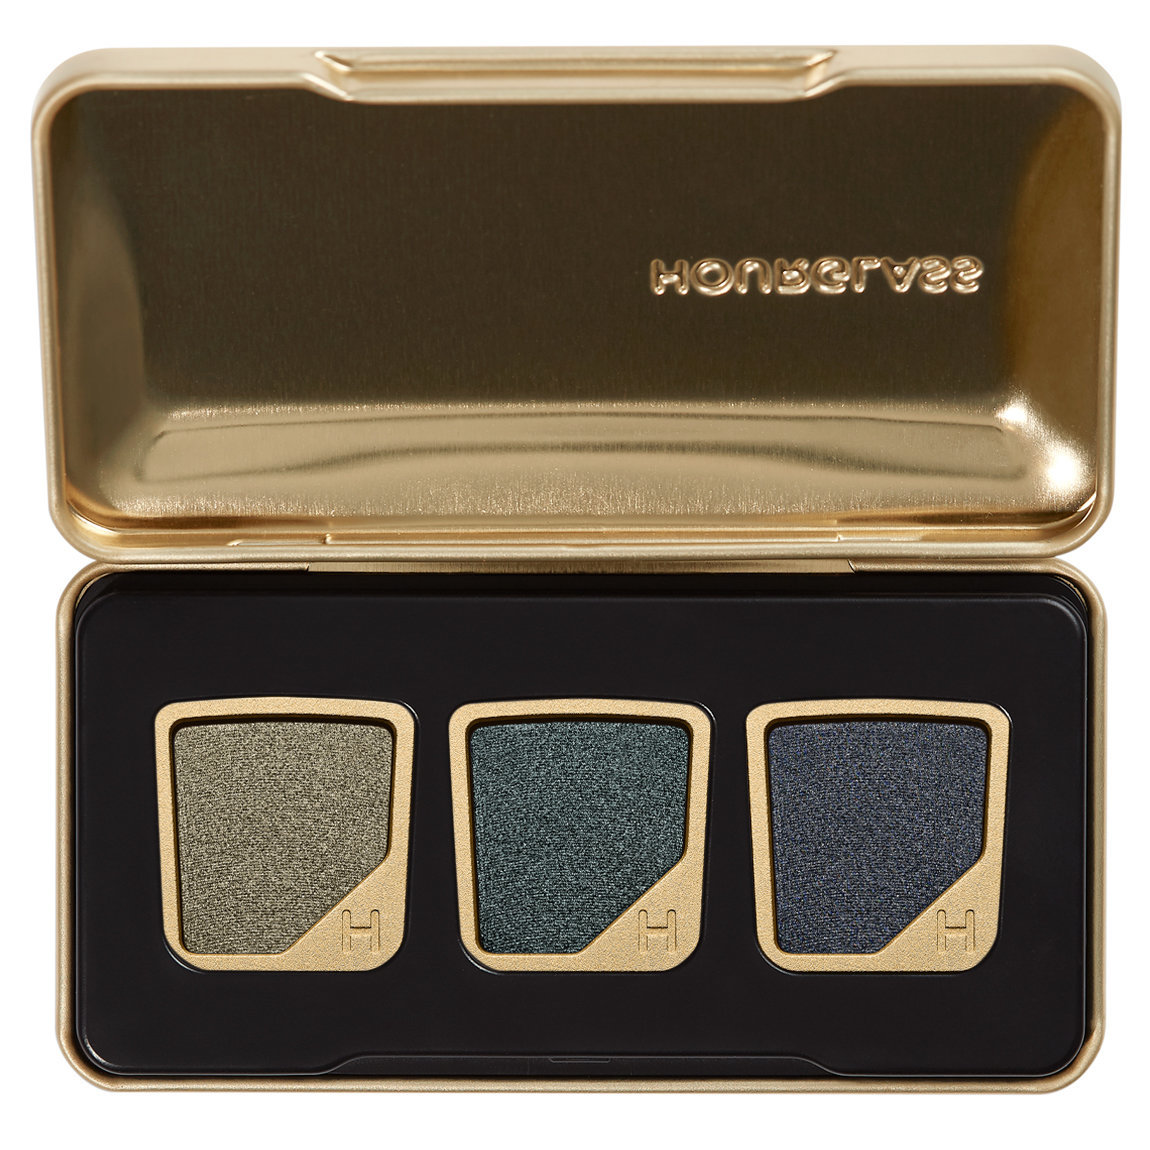 Hourglass Curator 3-Pan Filled Palette Aqua Marine alternative view 1 - product swatch.